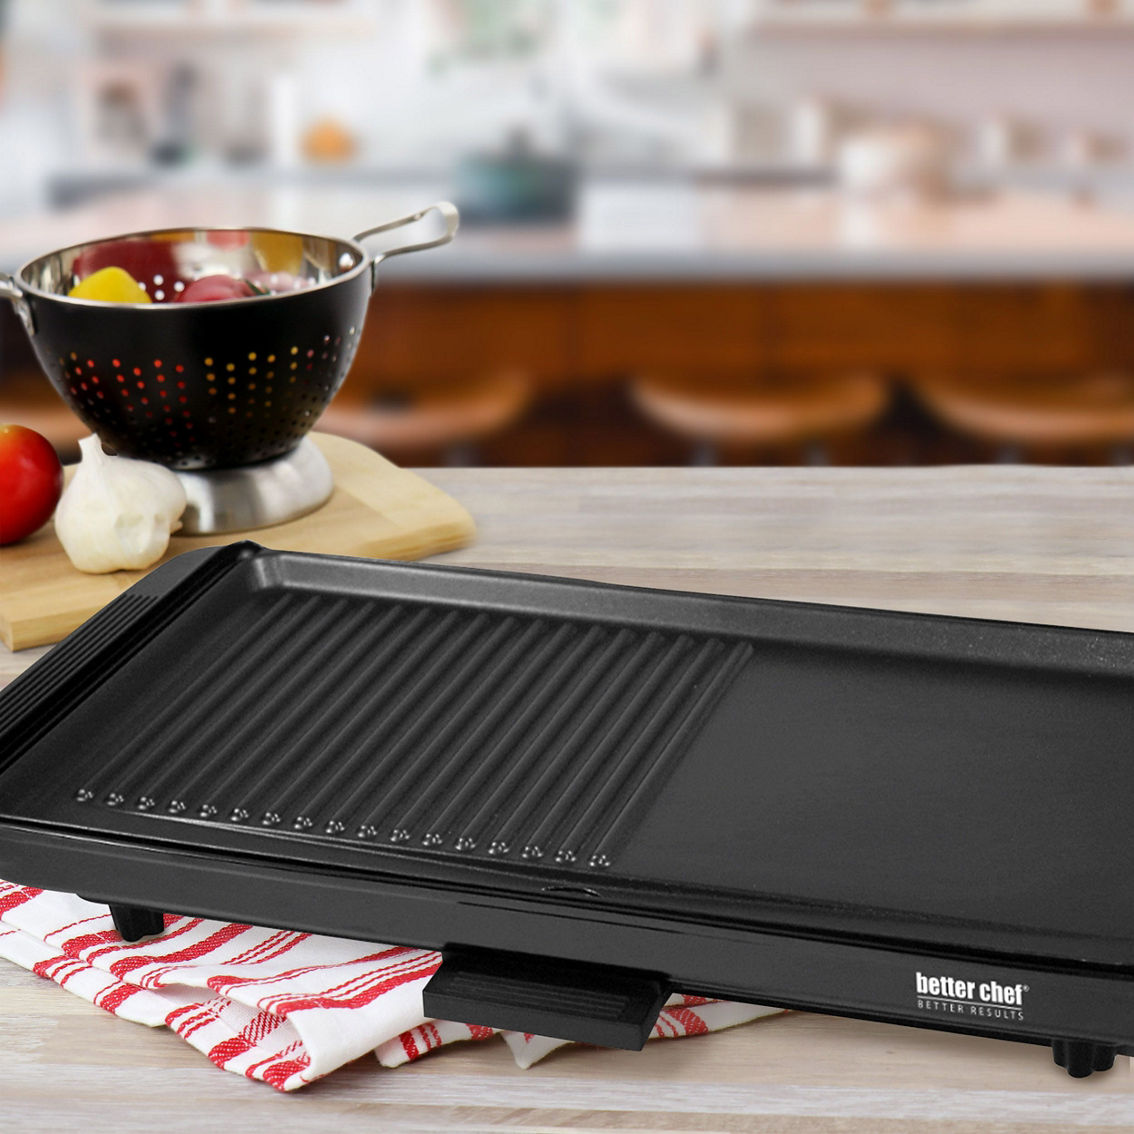 Better Chef 2 in 1 Family Size Electric Counter Top Grill/Griddle - Image 4 of 4